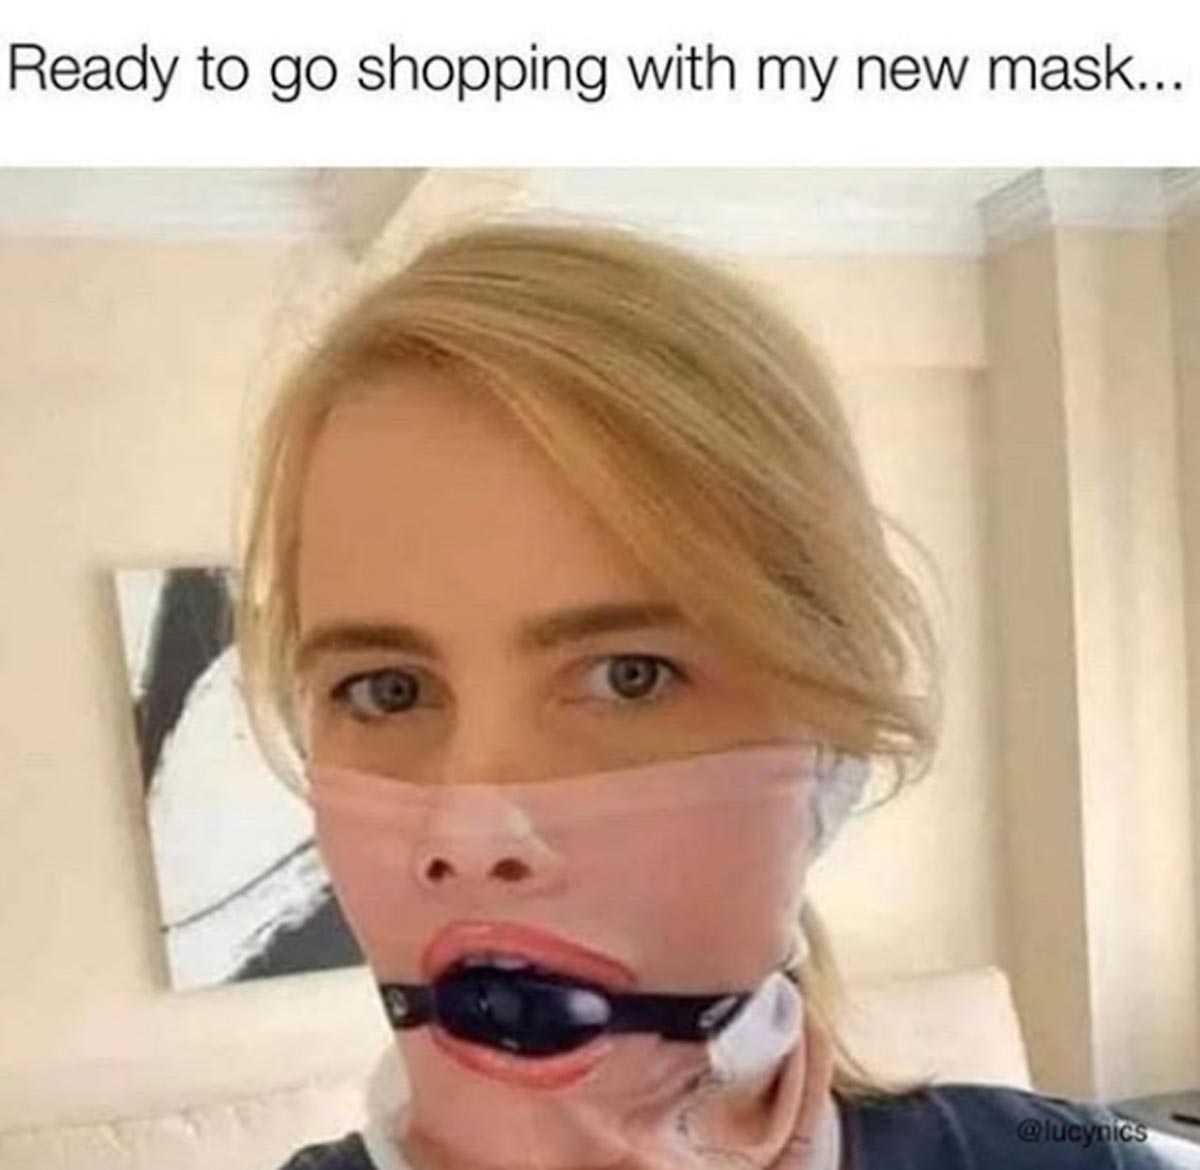 funny sex memes - funny mask memes - Ready to go shopping with my new mask...